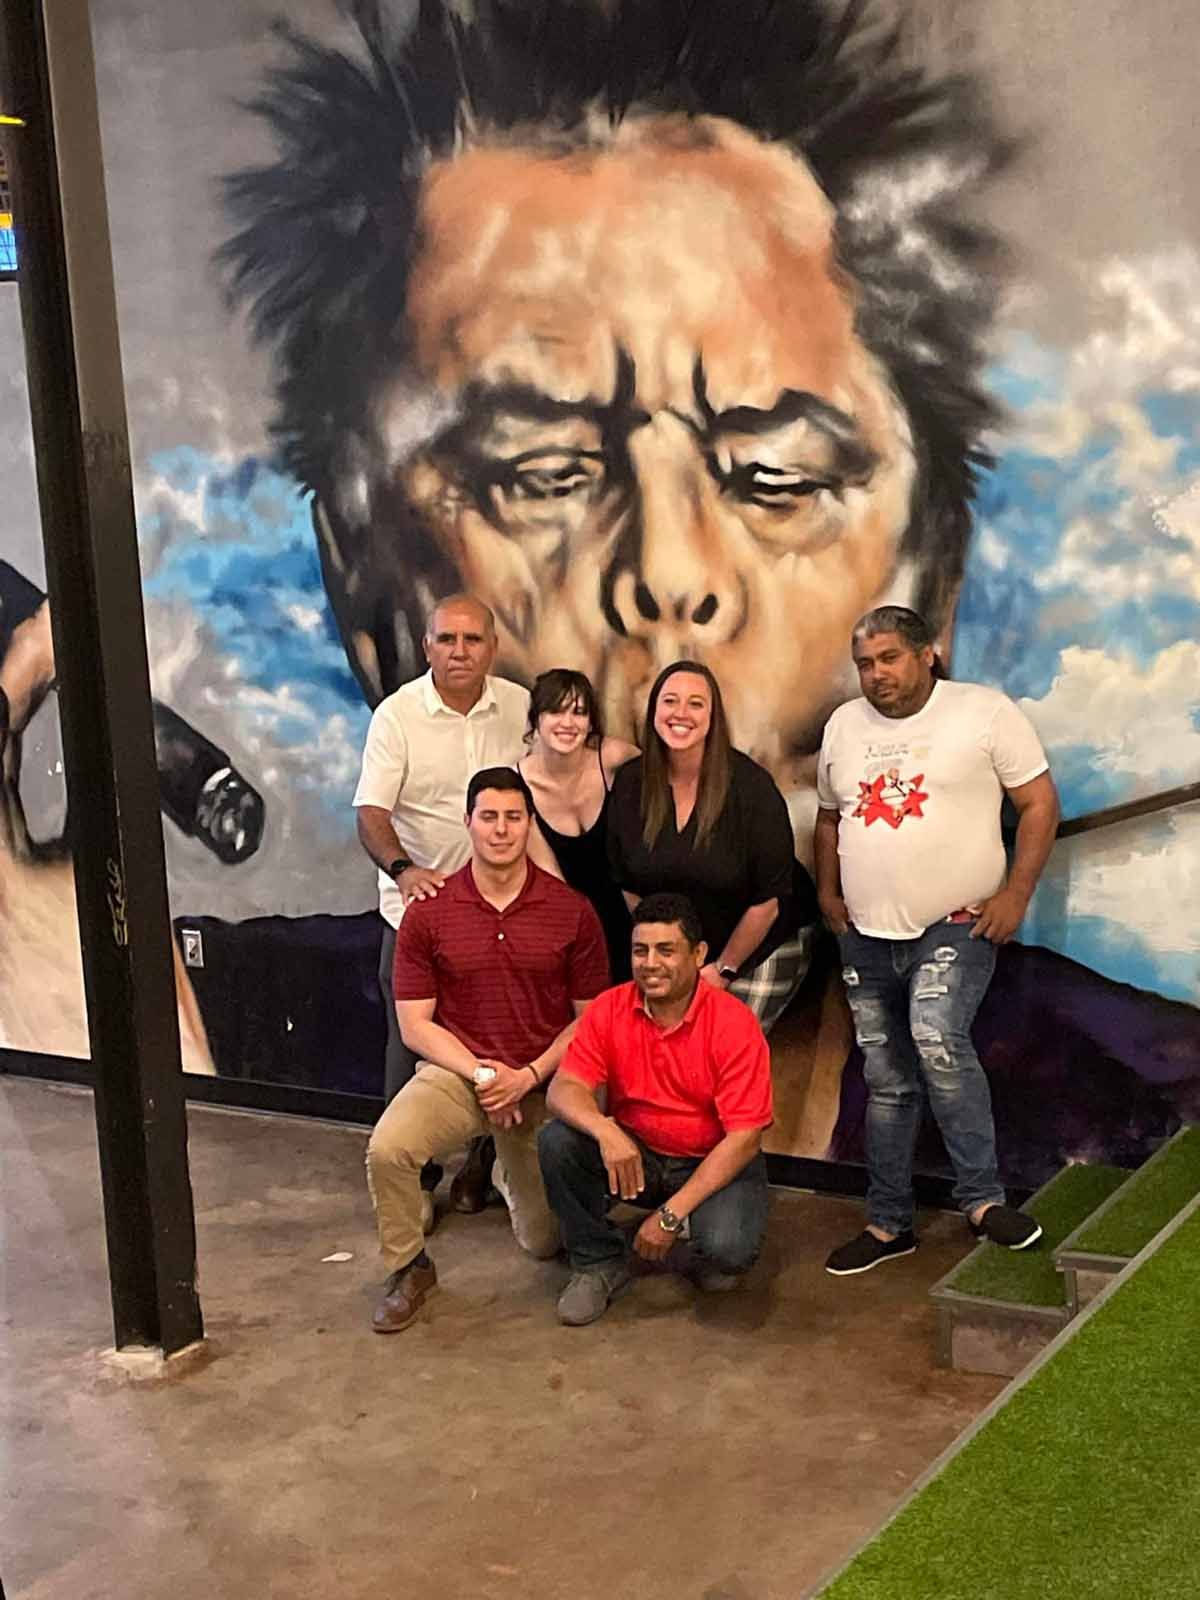 a group of people standing in front of a mural of a face with closed eyes